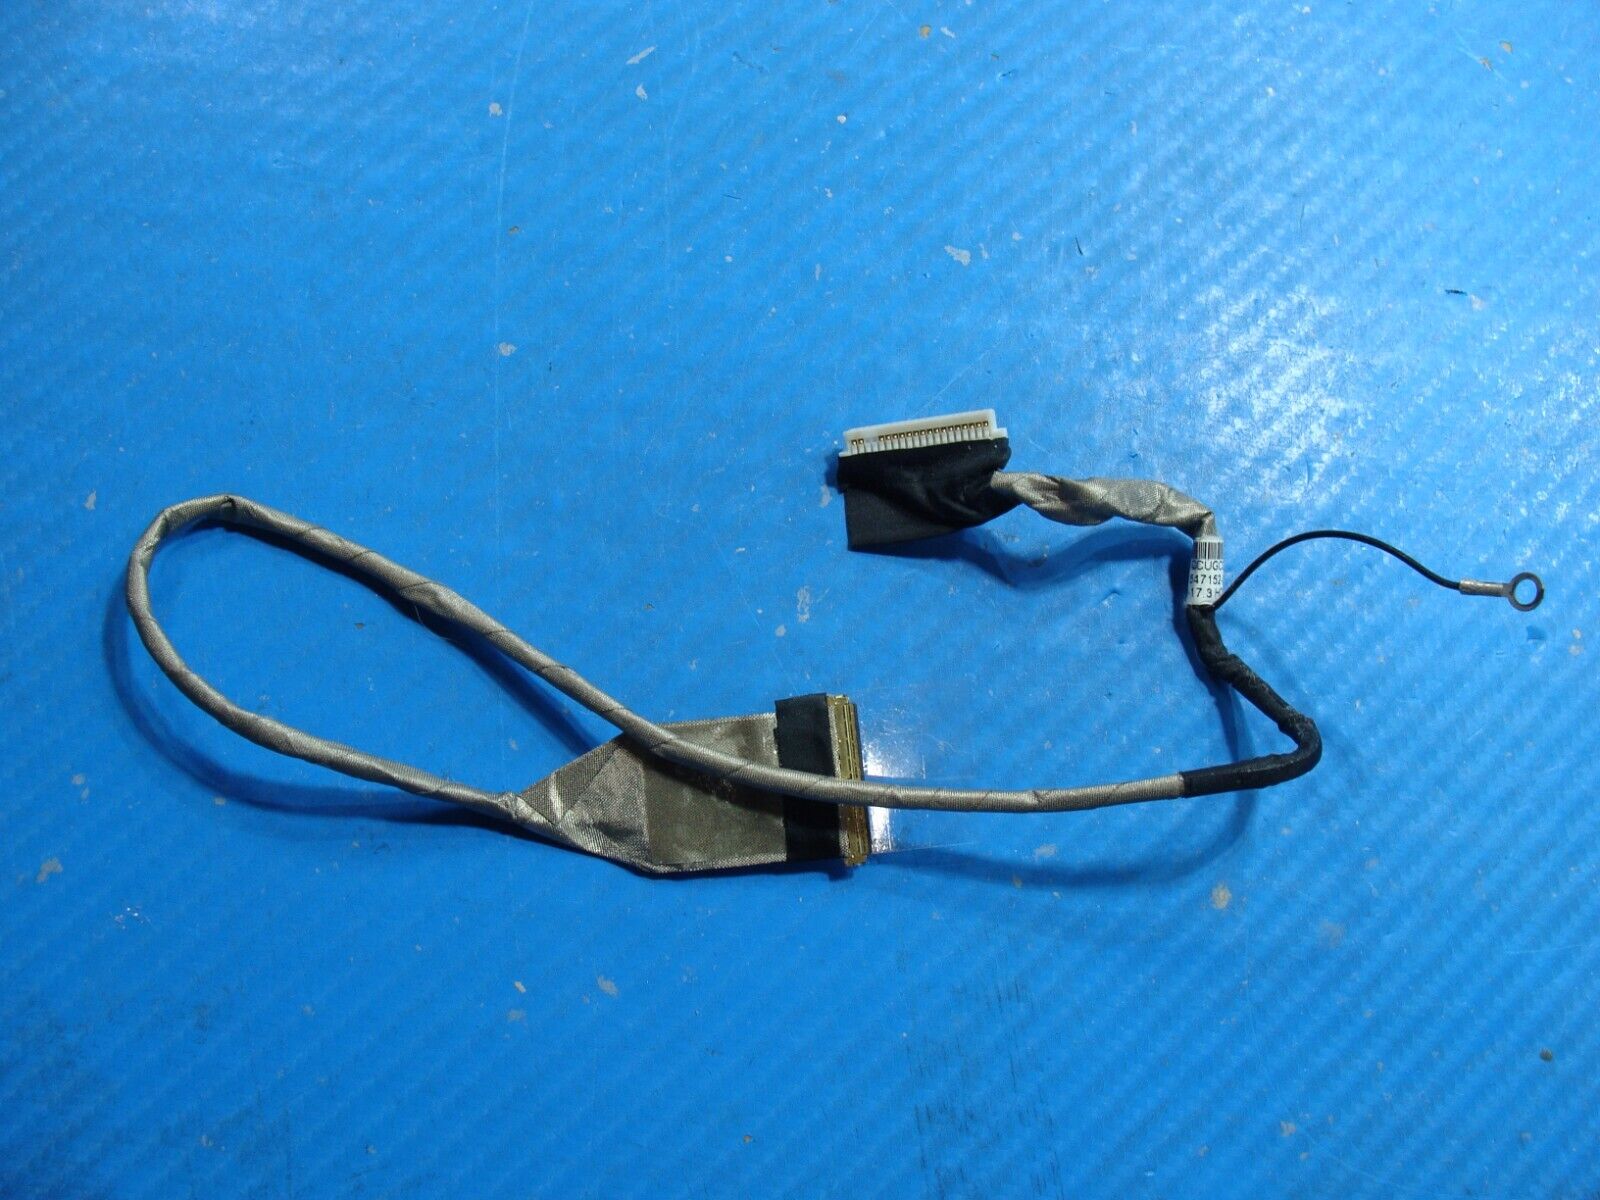 HP ProBook 17.3” 4730s Genuine Laptop LCD Video Cable 6017B0298902